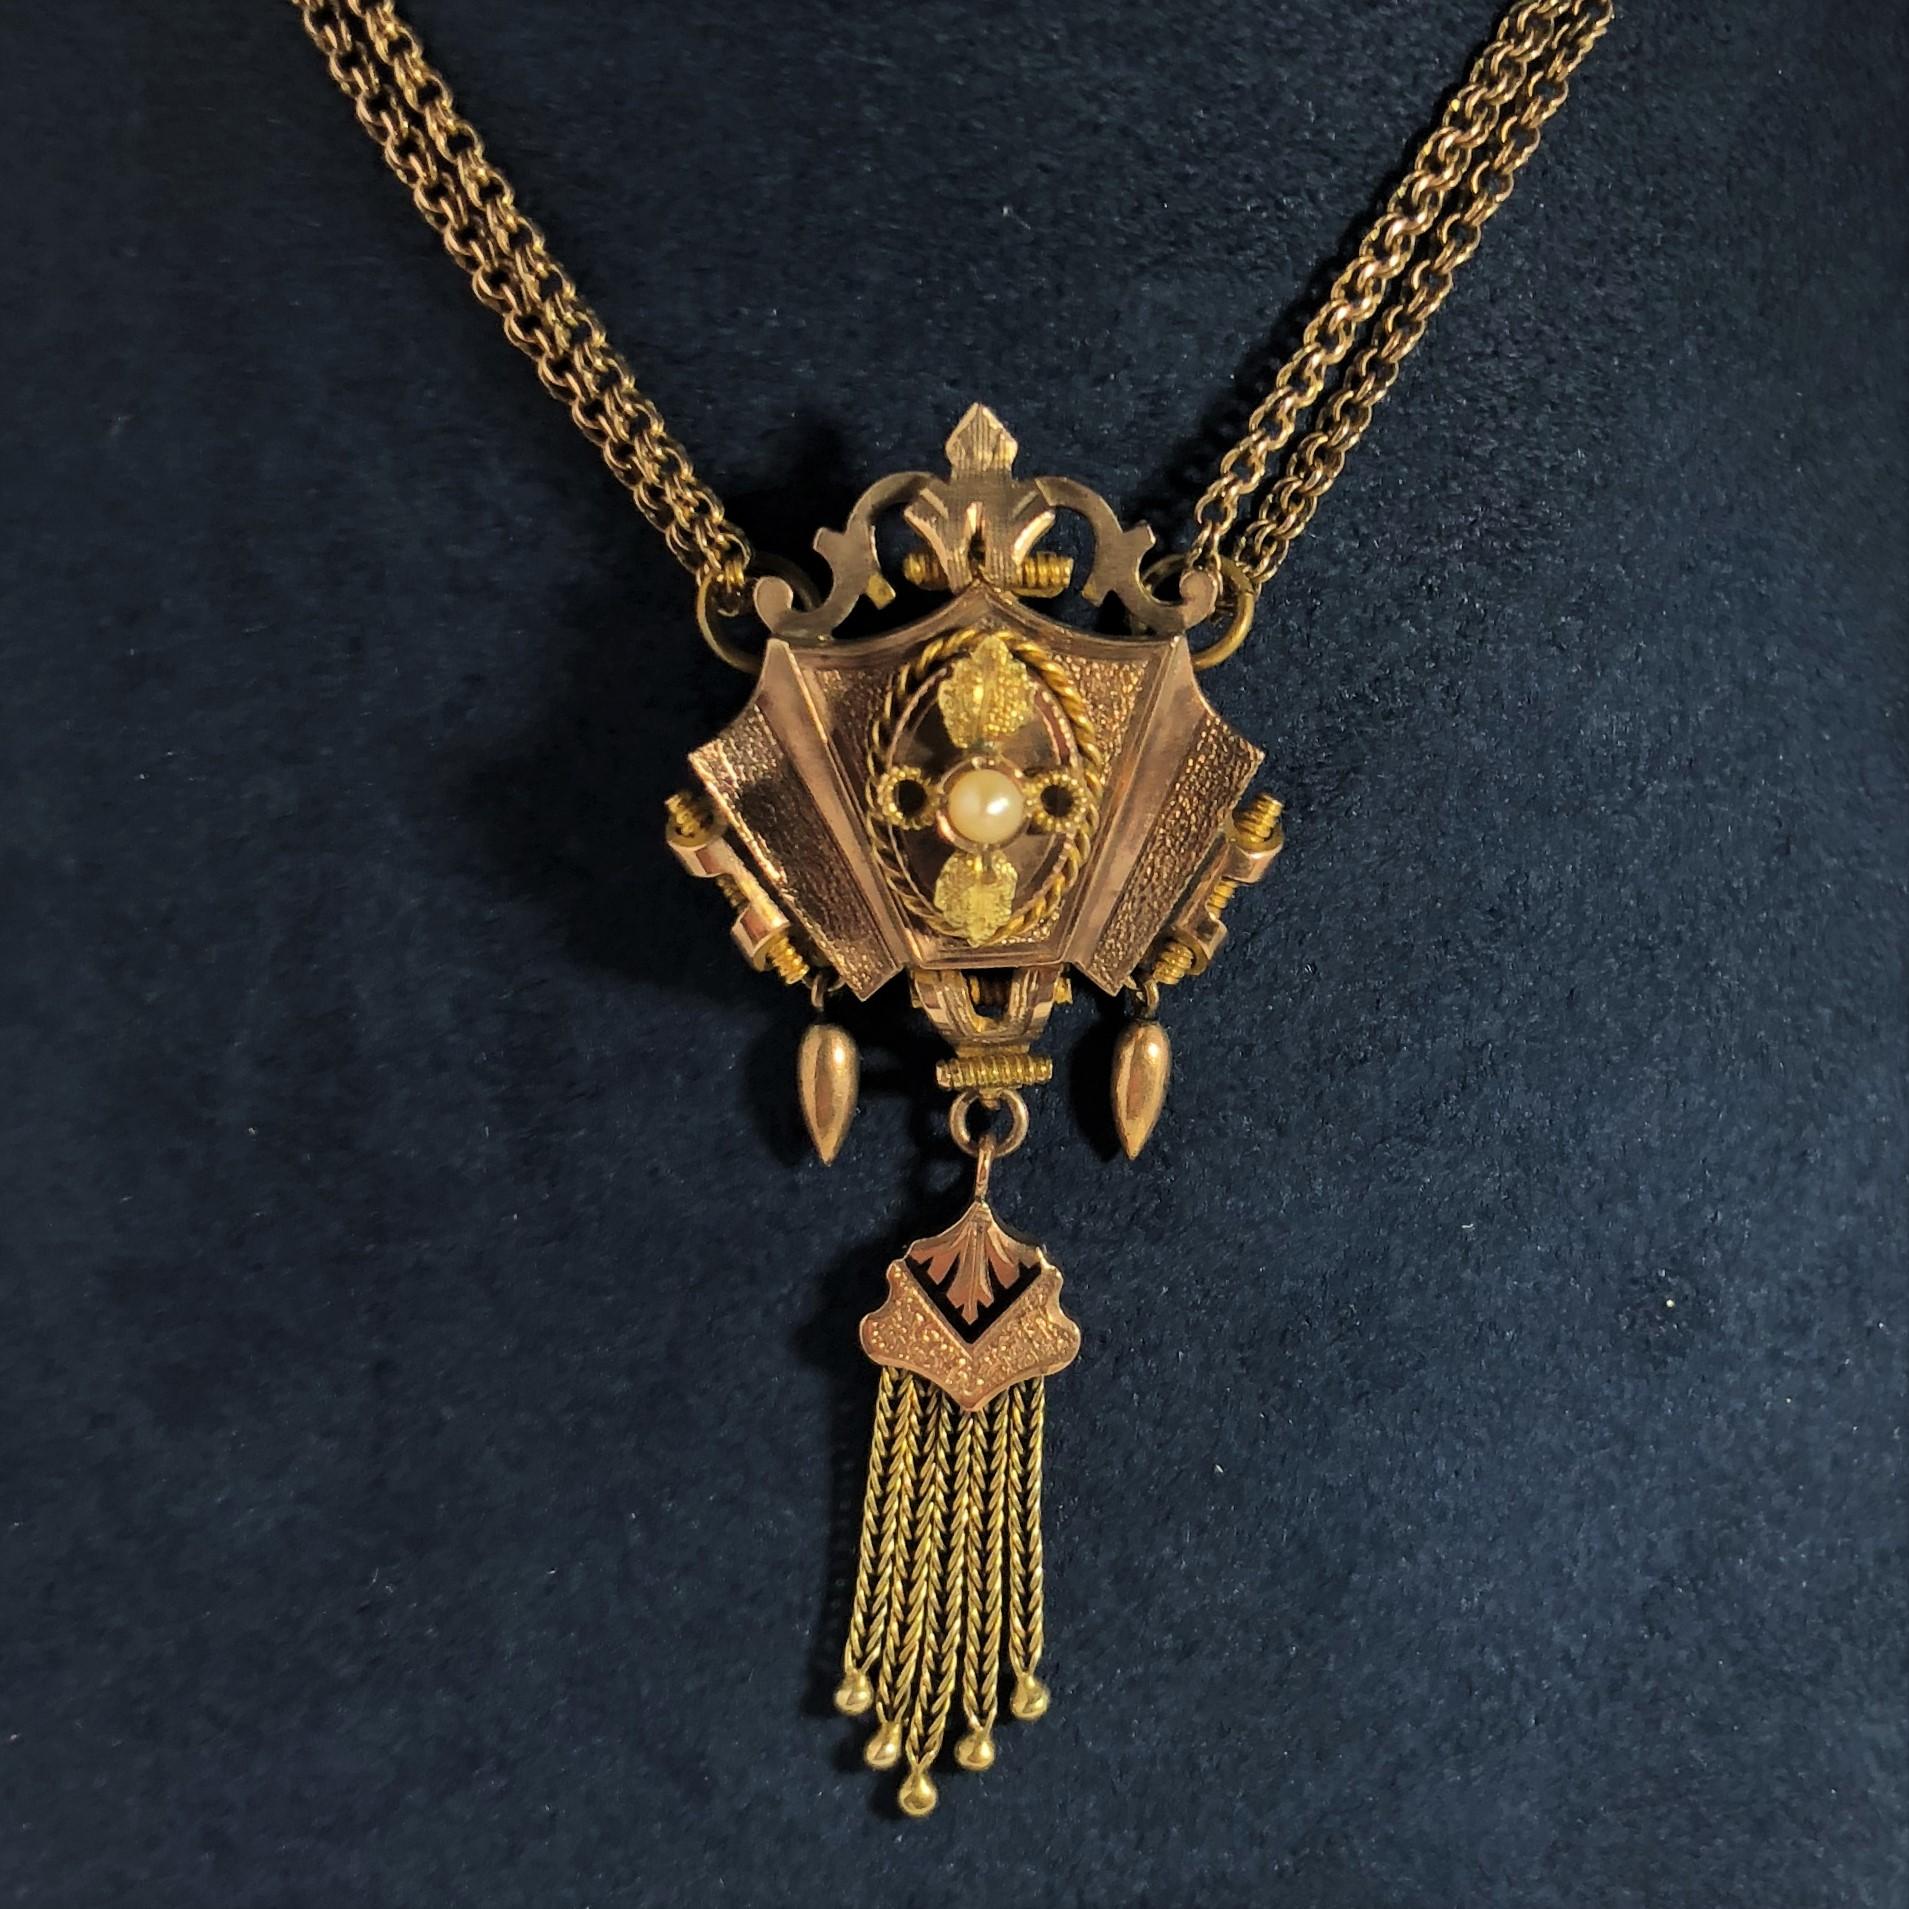 Antique Victorian 2 Tone Gold Seed Pearl, Enamel and Tassel Double Chain Necklace. This piece is very special, and in mint condition. Early Victorian it is created in approx. 15 karat yellow and rose gold , weight 20.2 grams. The gold work is